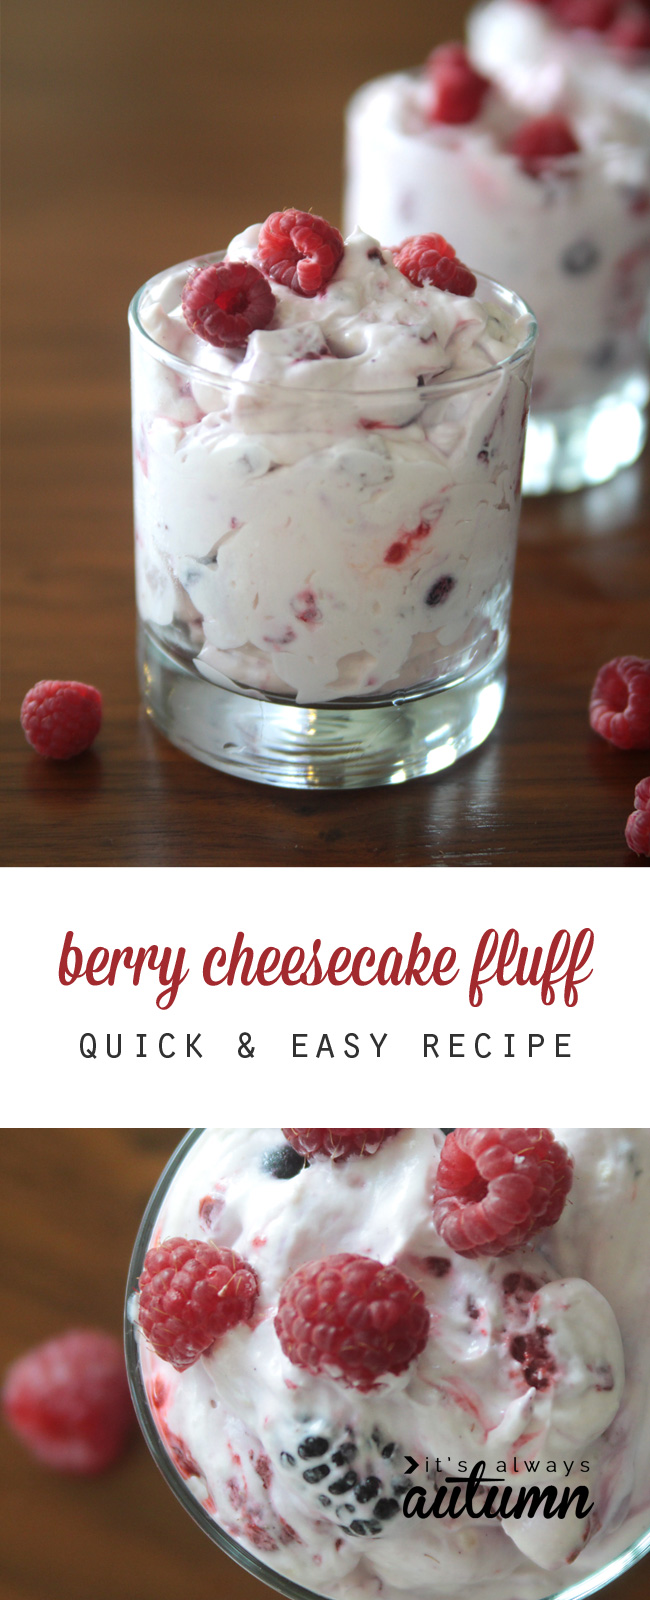 Berry cheesecake fluff in a glass